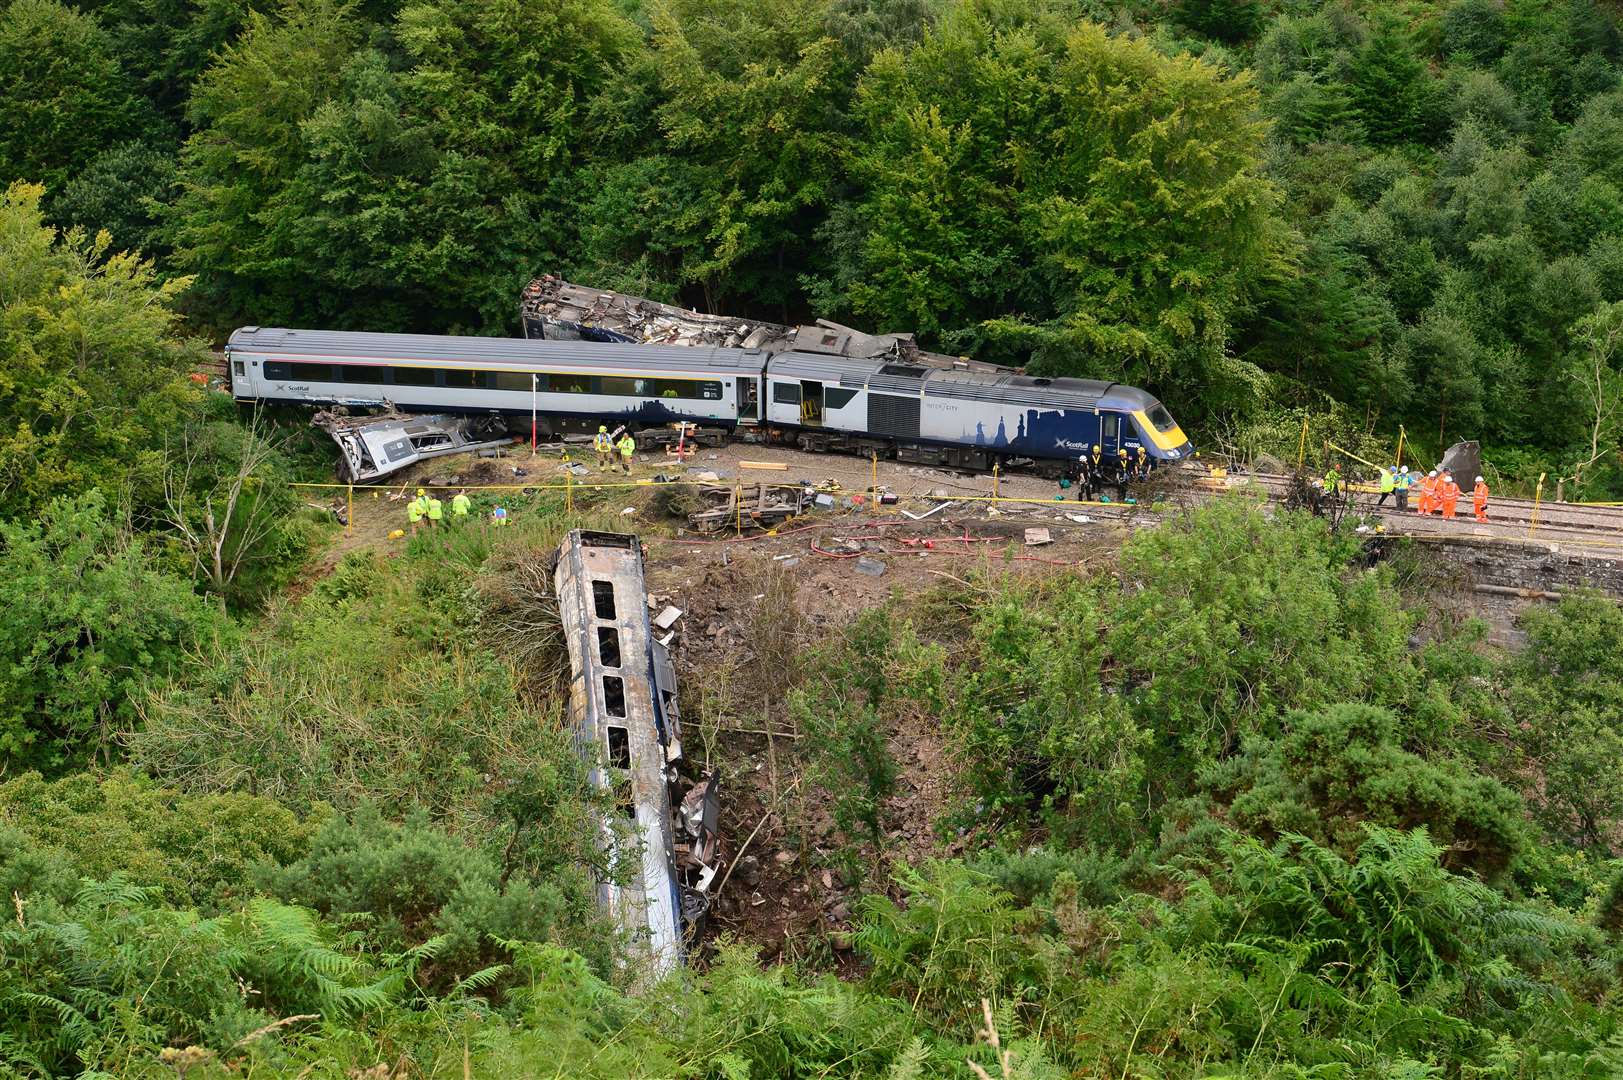 Part of the train plunged down an embankment in the crash (PA)